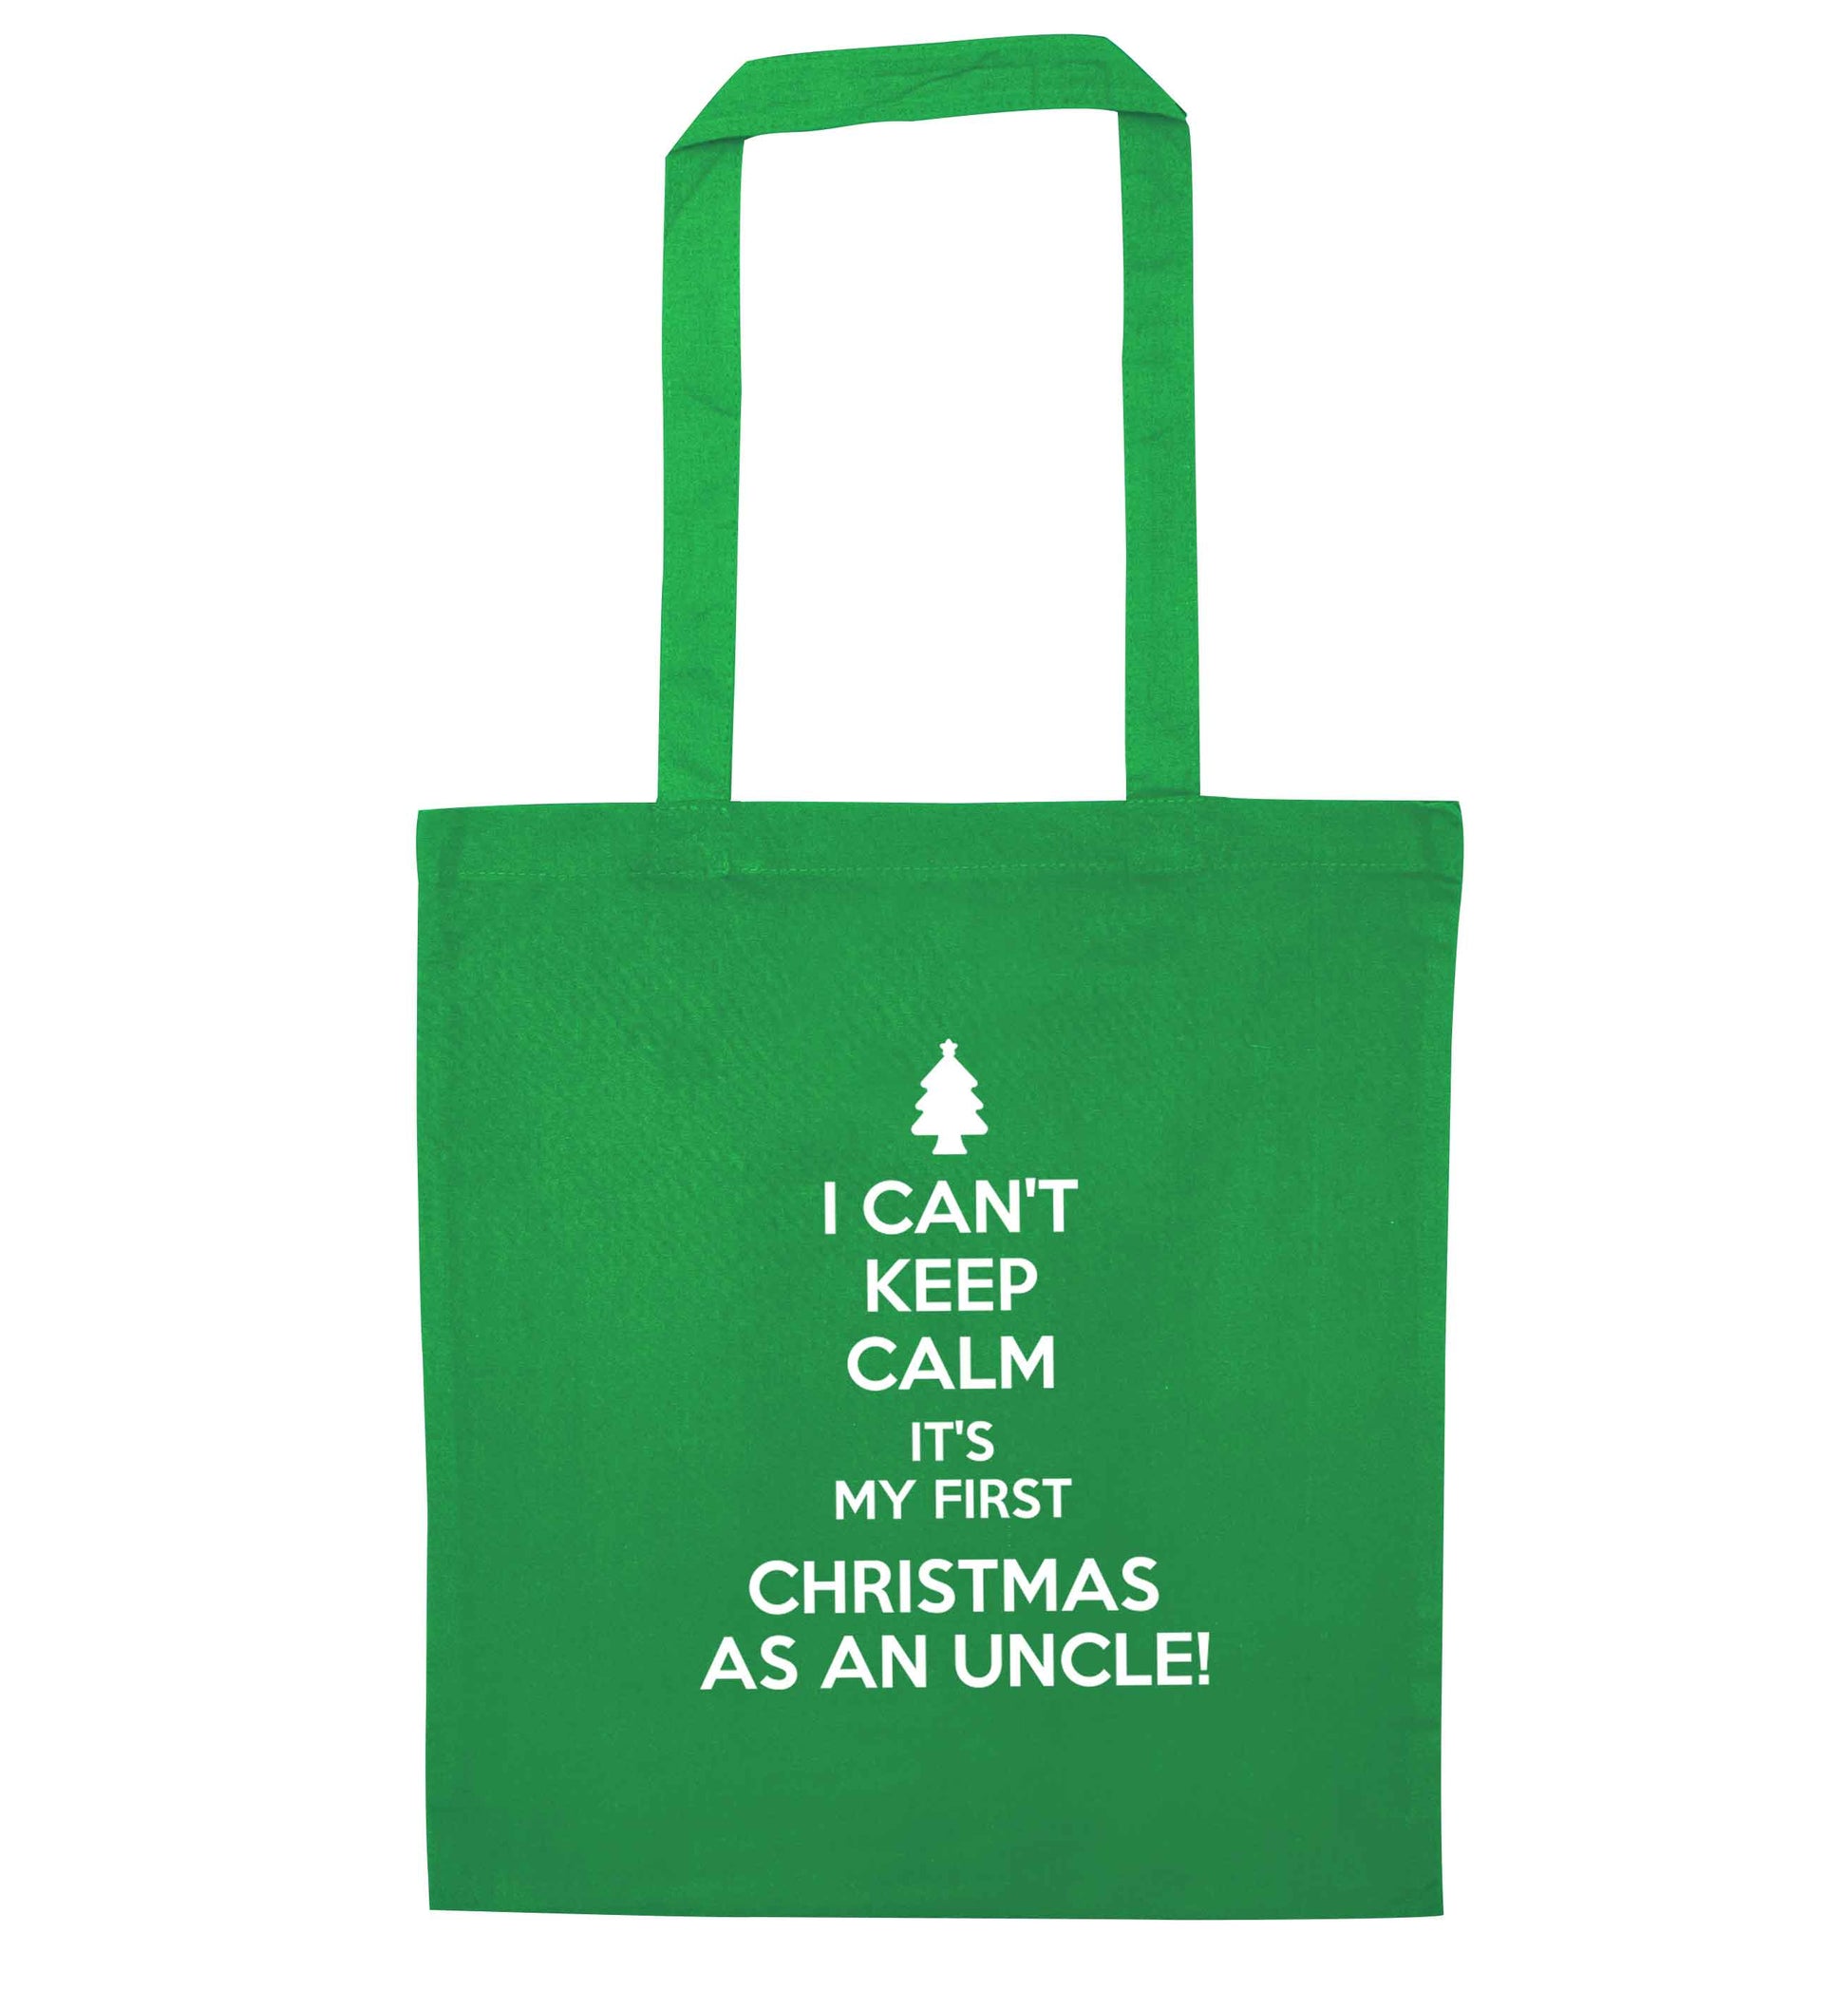 I can't keep calm it's my first Christmas as an uncle! green tote bag